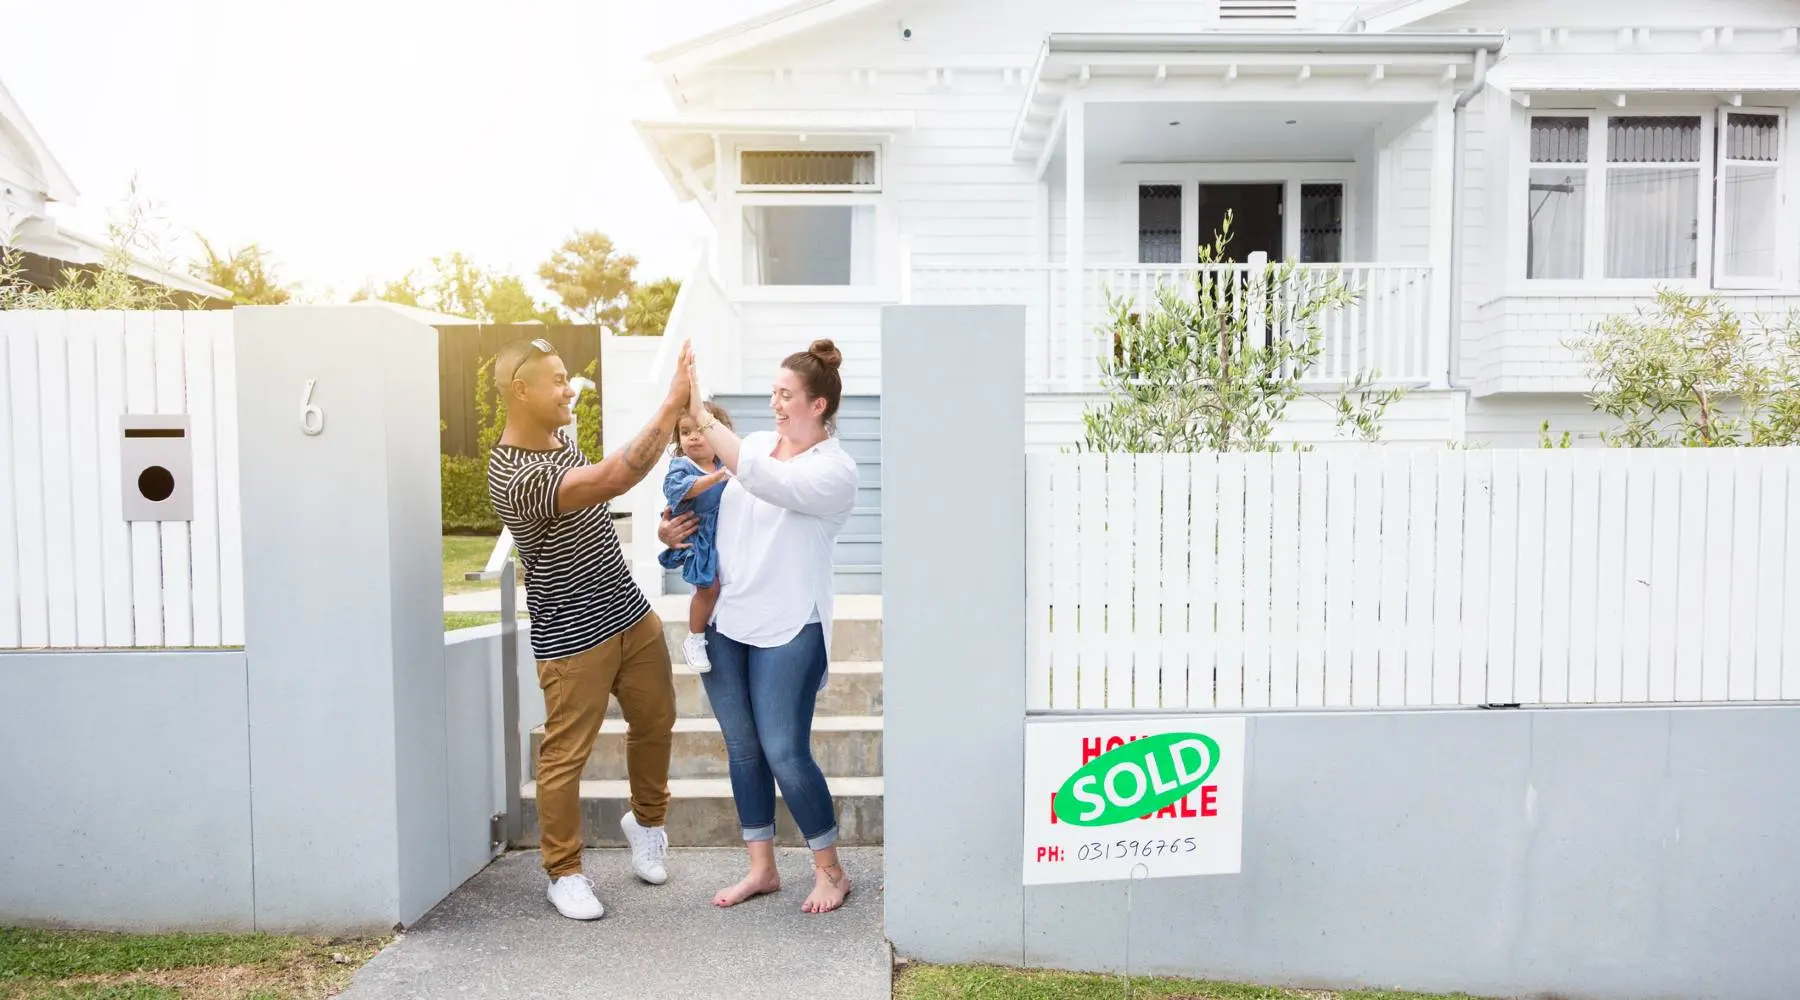 Rent or buy? The tough choice for young Aussies